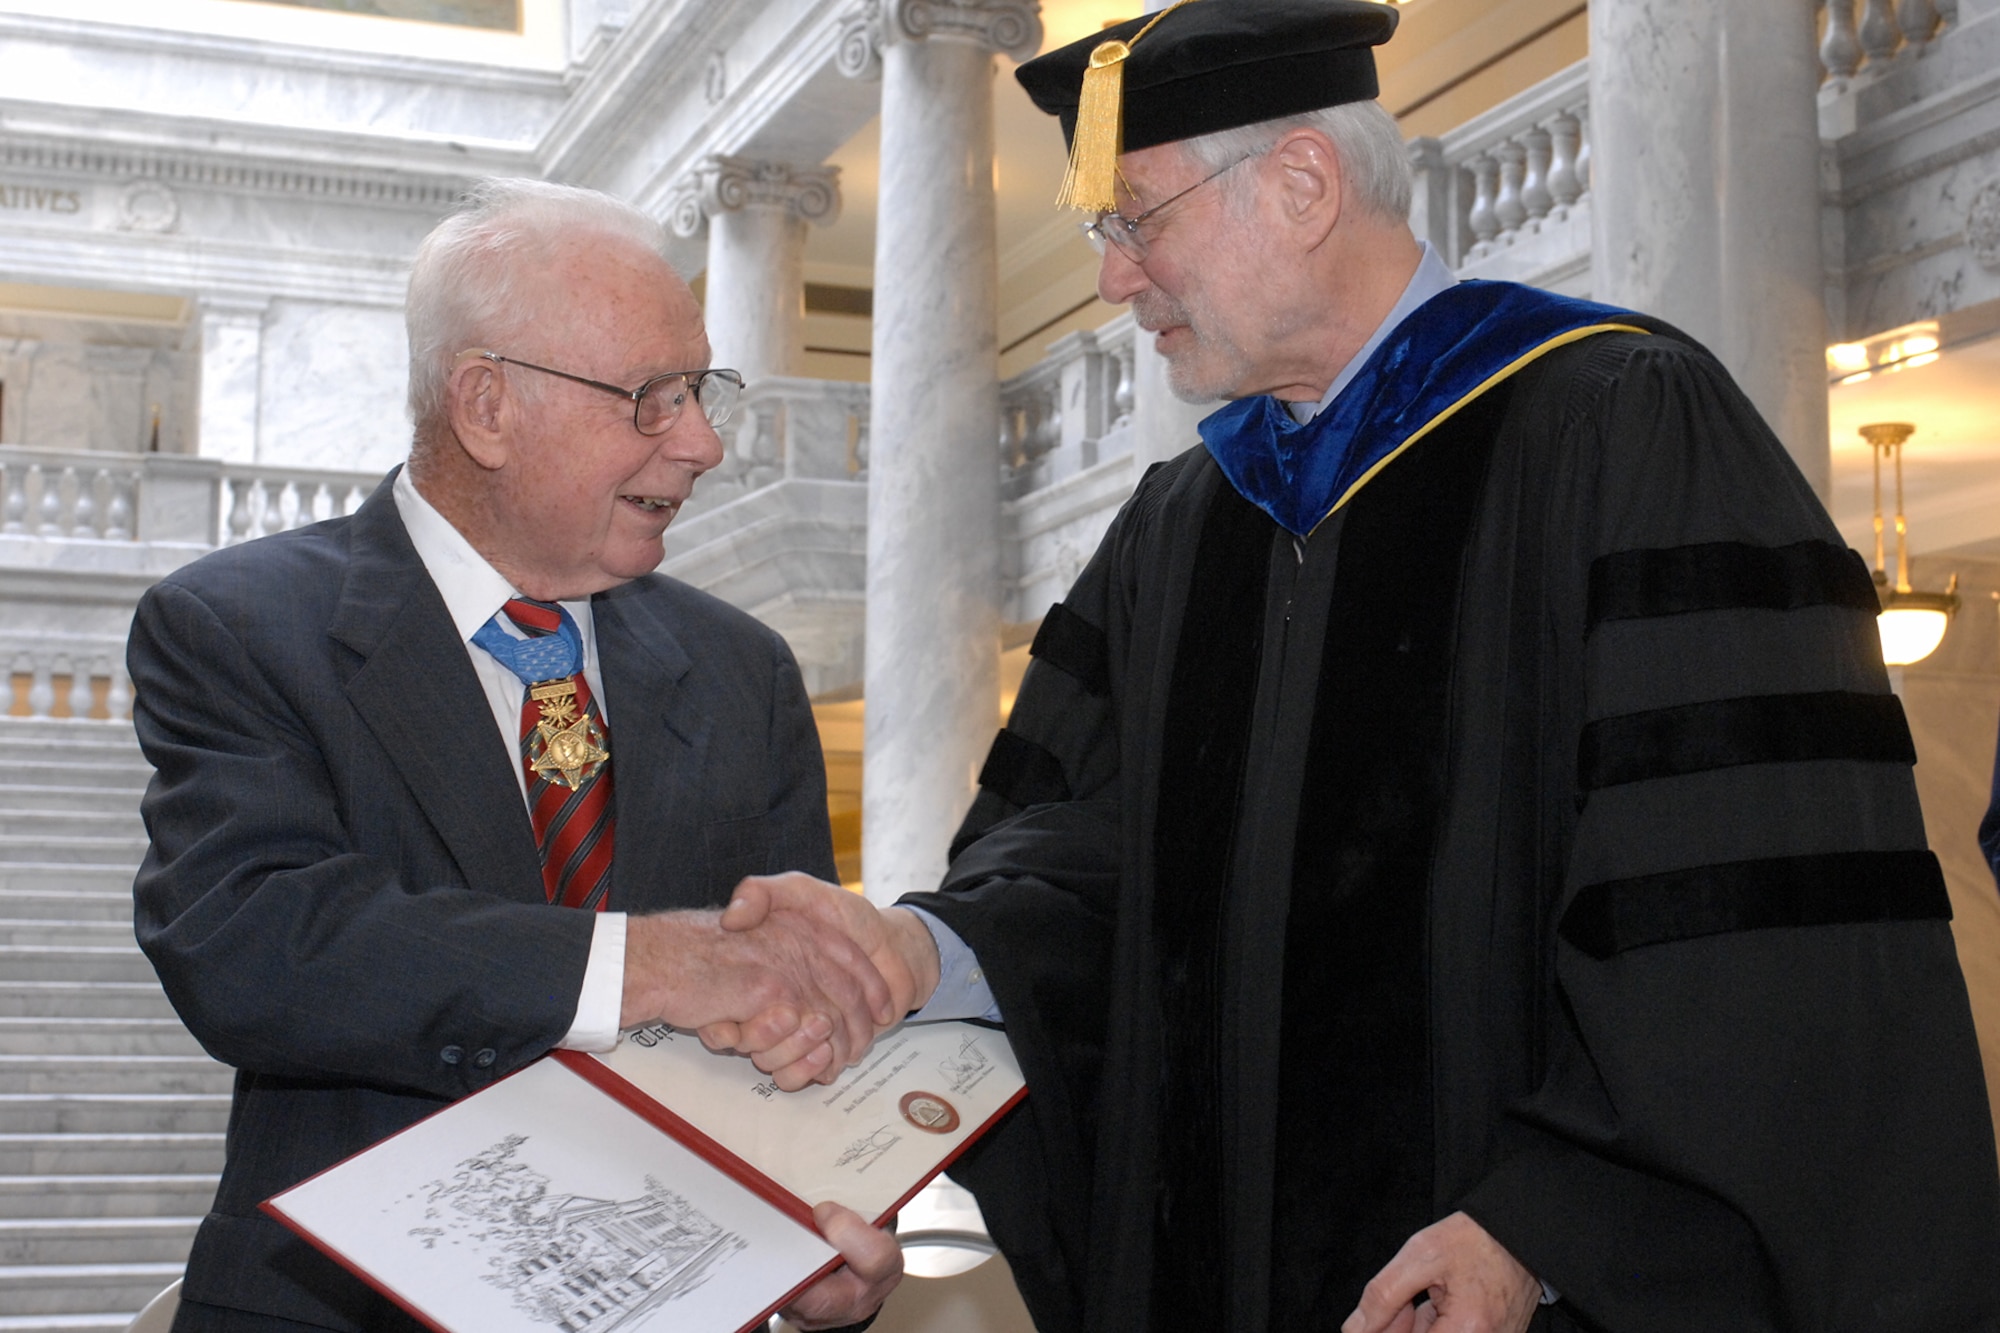 The 81-year-old retired Col. Bernard F. Fisher shakes hands with J. Steven Ott, University of Utah Dean of the College of Social and Behavioral Science, after receiving his Bachelors of Fine Arts May 3. (U.S. Air Force Photo by Alex R. Lloyd)